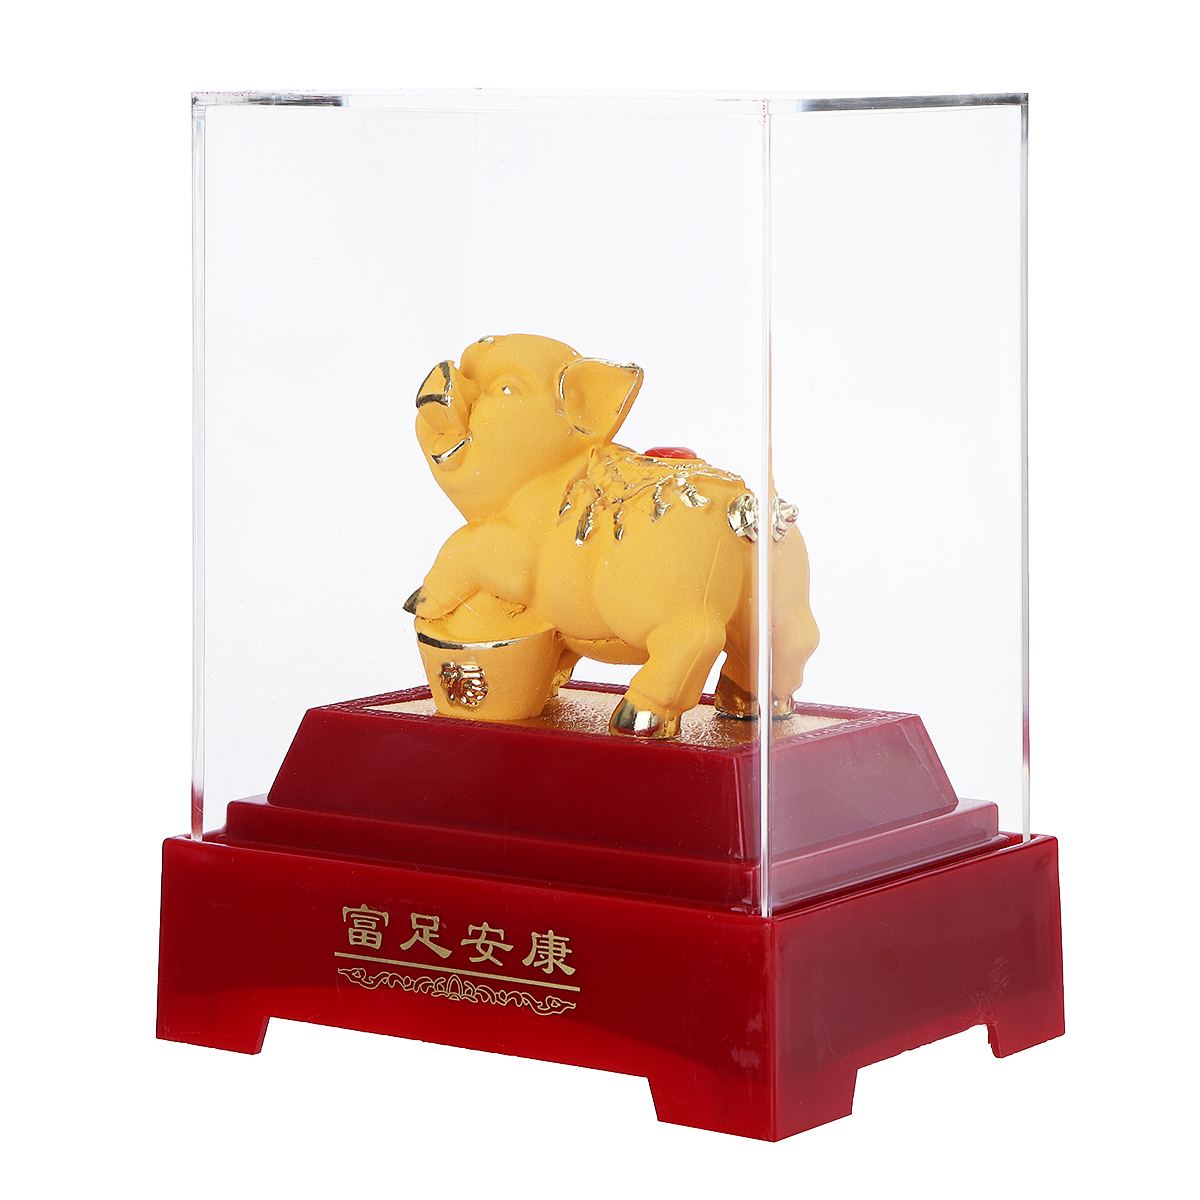 2019-Chinese-Zodiac-Gold-Pig-Money-Wealth-Statue-Office-Home-Decorations-Ornament-Gift-1515810-9